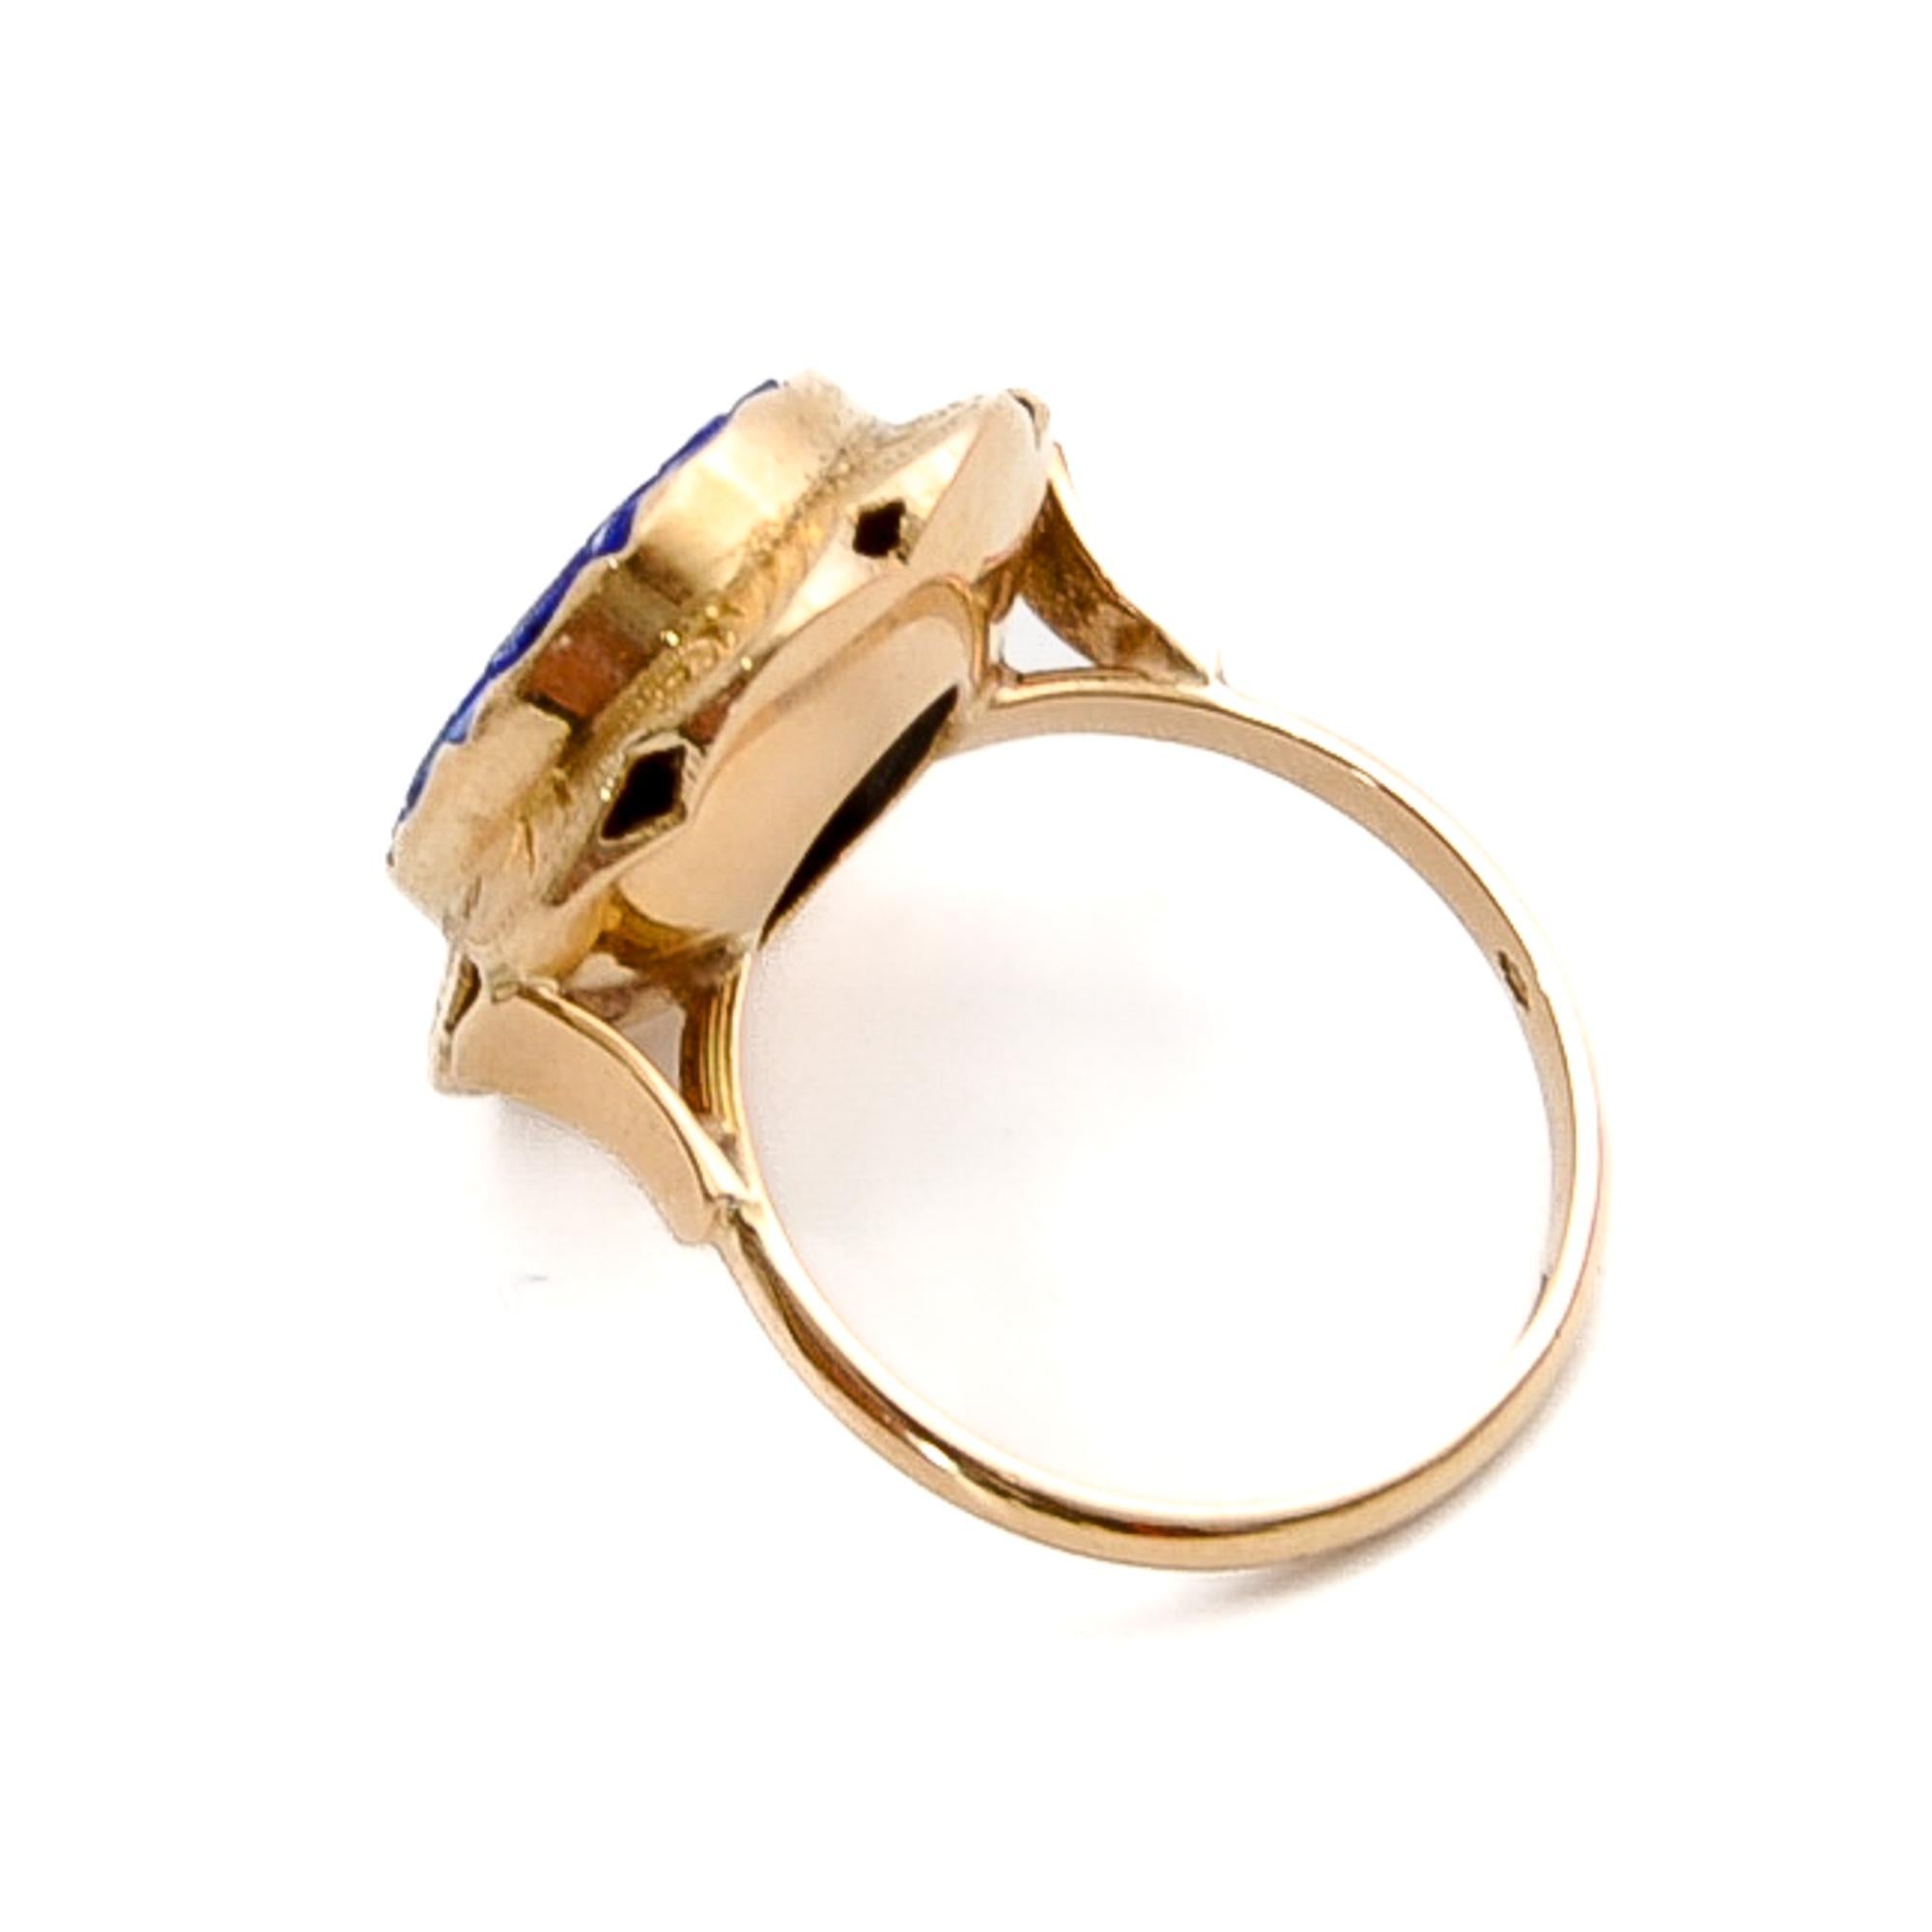 This is a vintage 14 karat yellow gold ring crafted with a beautiful carved lapis lazuli gemstone. The design creates this lovely engraved gold mounting of the ring. The edge of the mounting is oval-shaped and scalloped. The lapis has an amazing